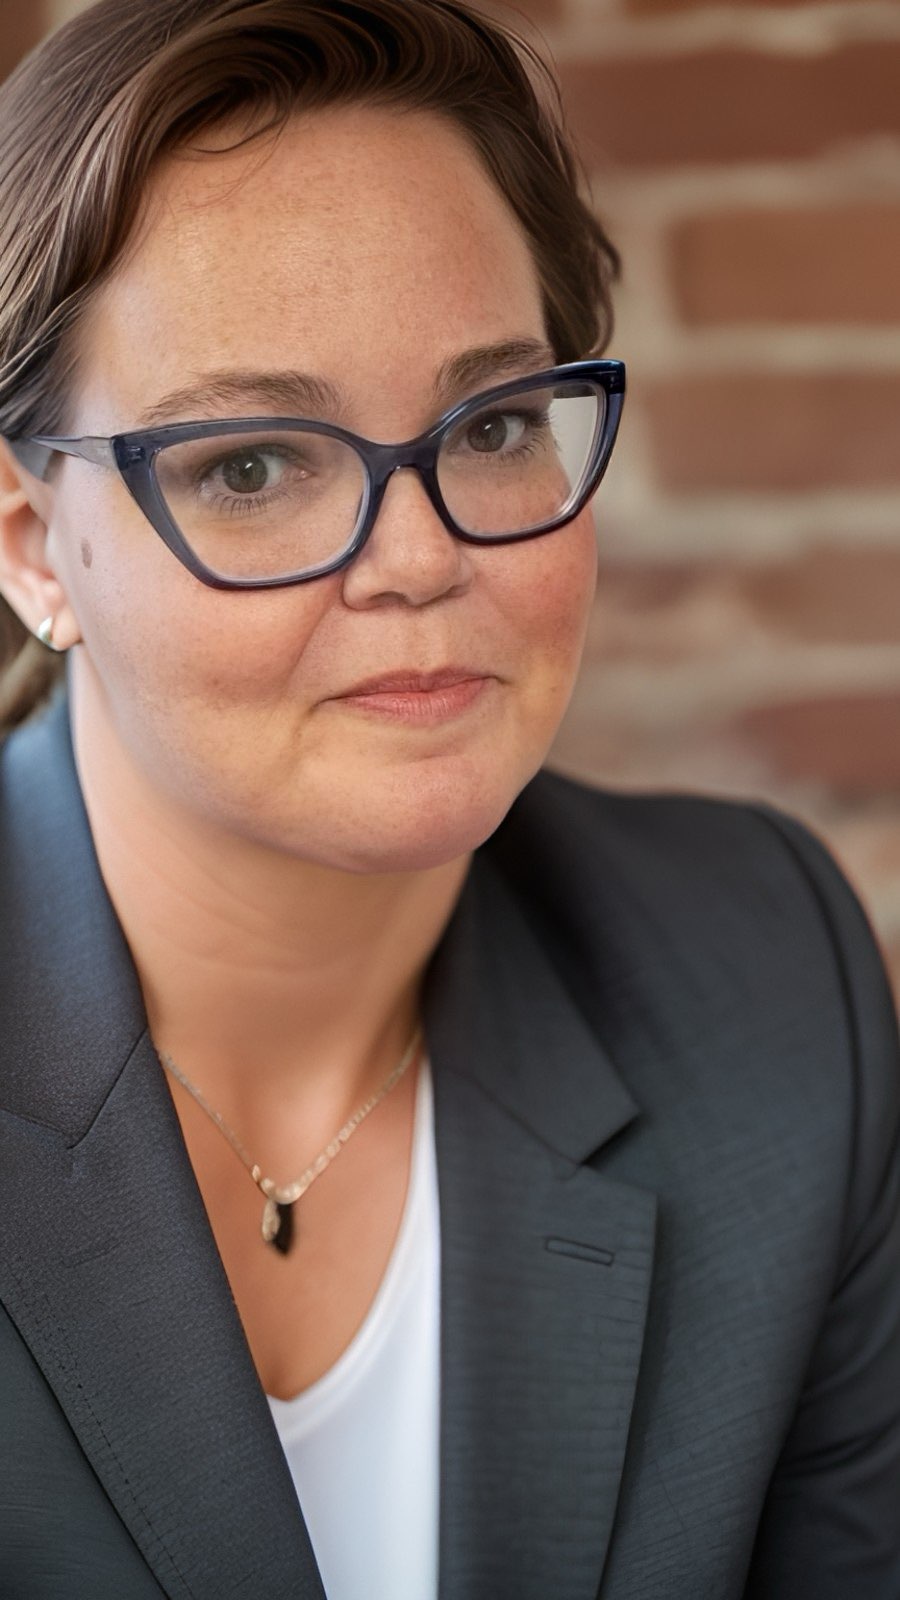 Woman wearing glasses with brown hair tied back and wearing a suit.